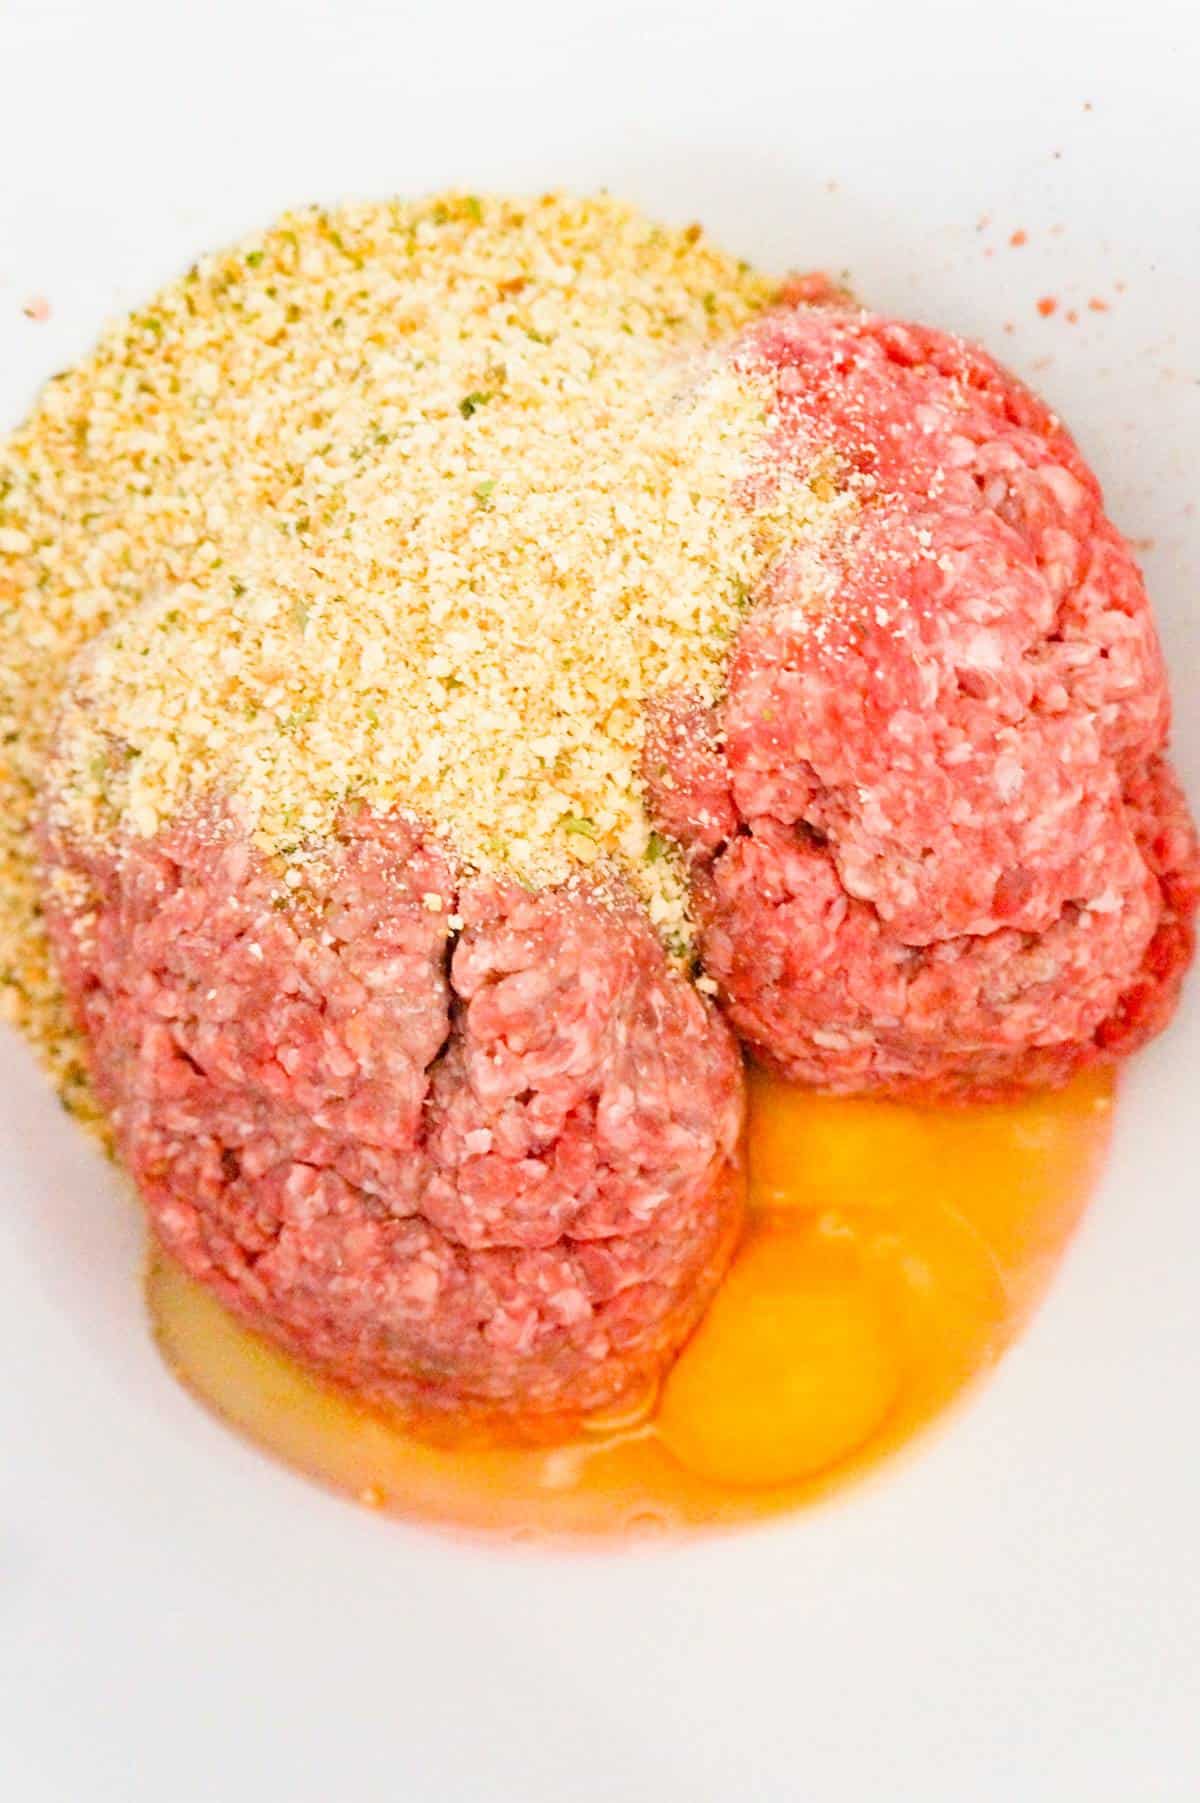 Italian bread crumbs, eggs and raw ground beef in a mixing bowl